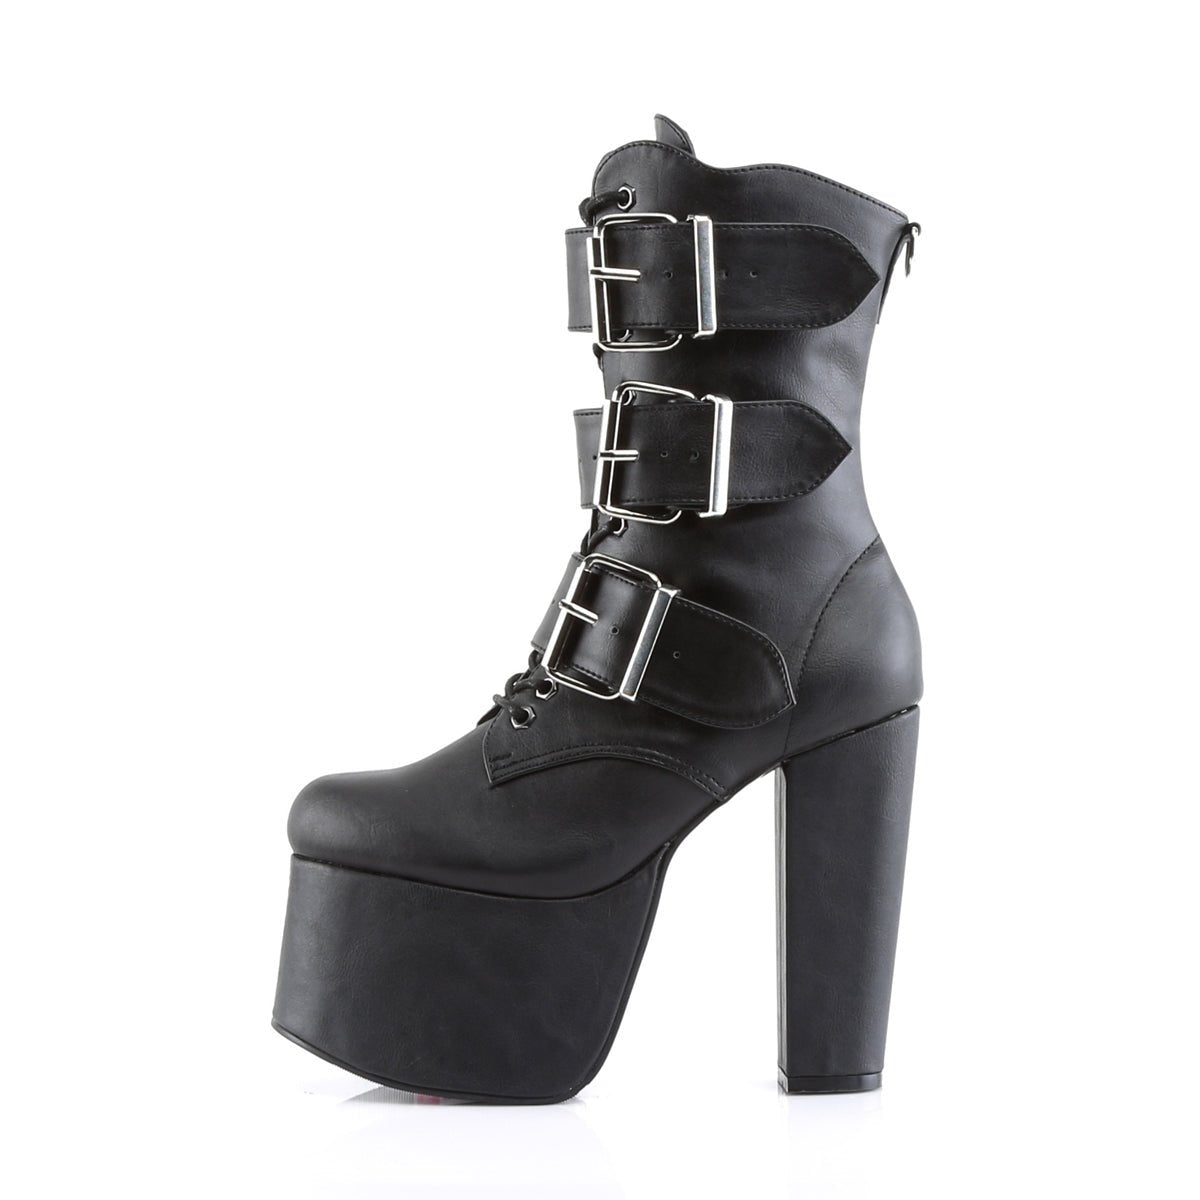 Too Fast | Demonia Torment 703 | Black Vegan Leather Women's Ankle Boots